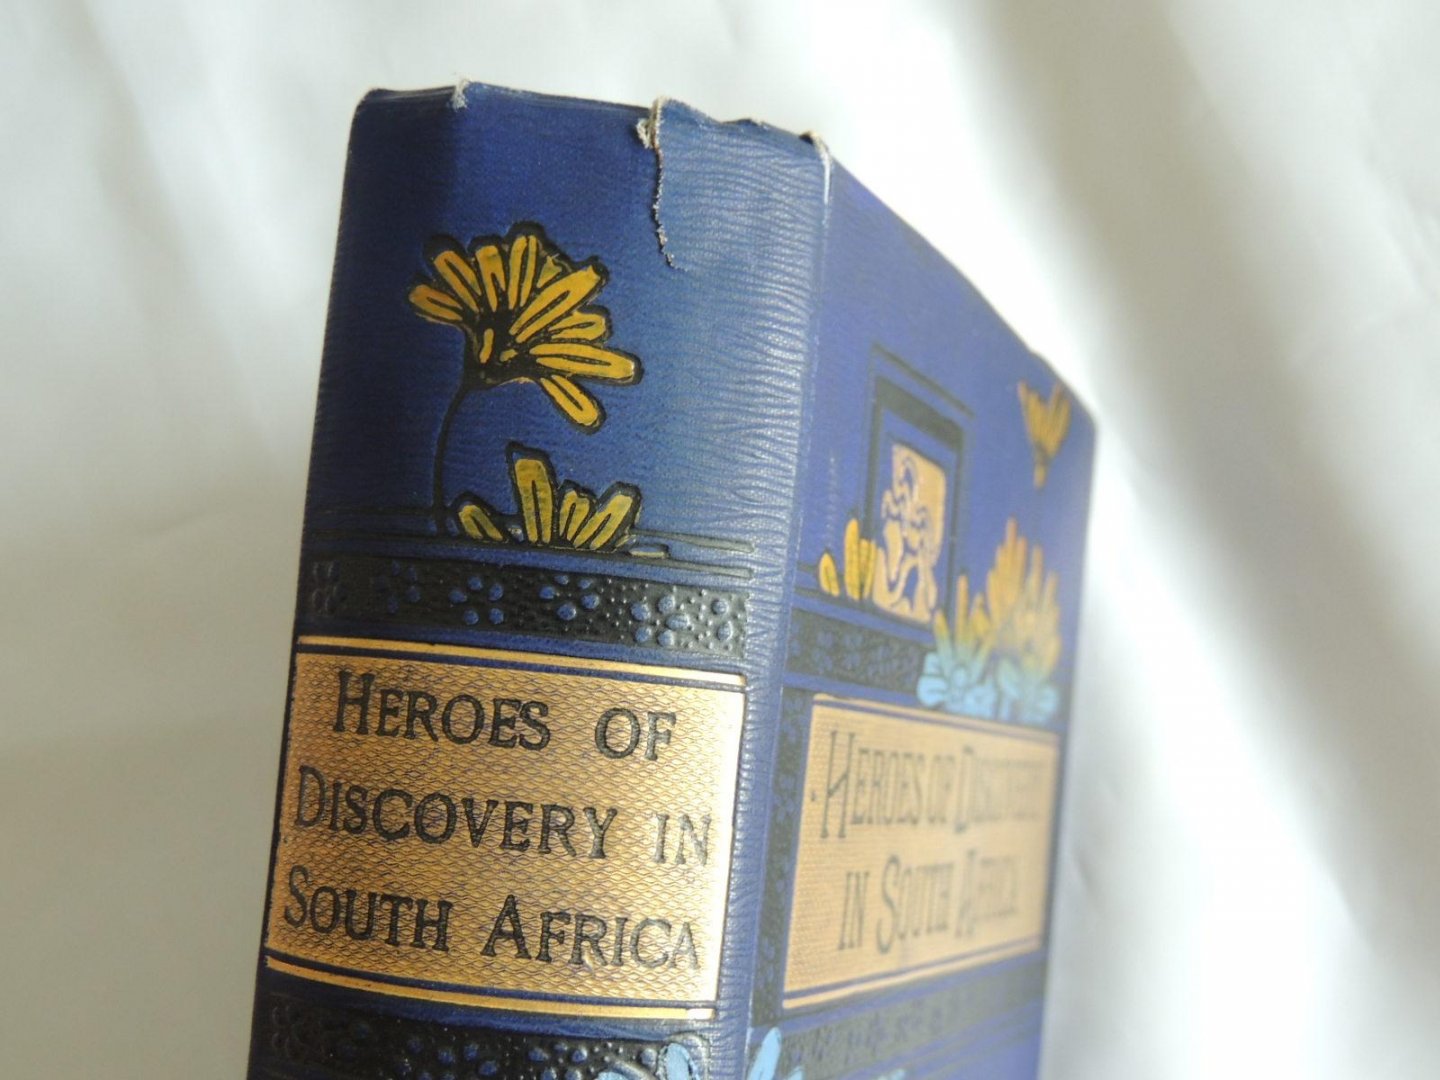 Bell (N) (N. D'Anvers) ---  Mungo Park - Heroes Of Discovery In South Africa --- Mungo Park - Travels in the interior of Africa - with eight illustrations in colour by John Williamson